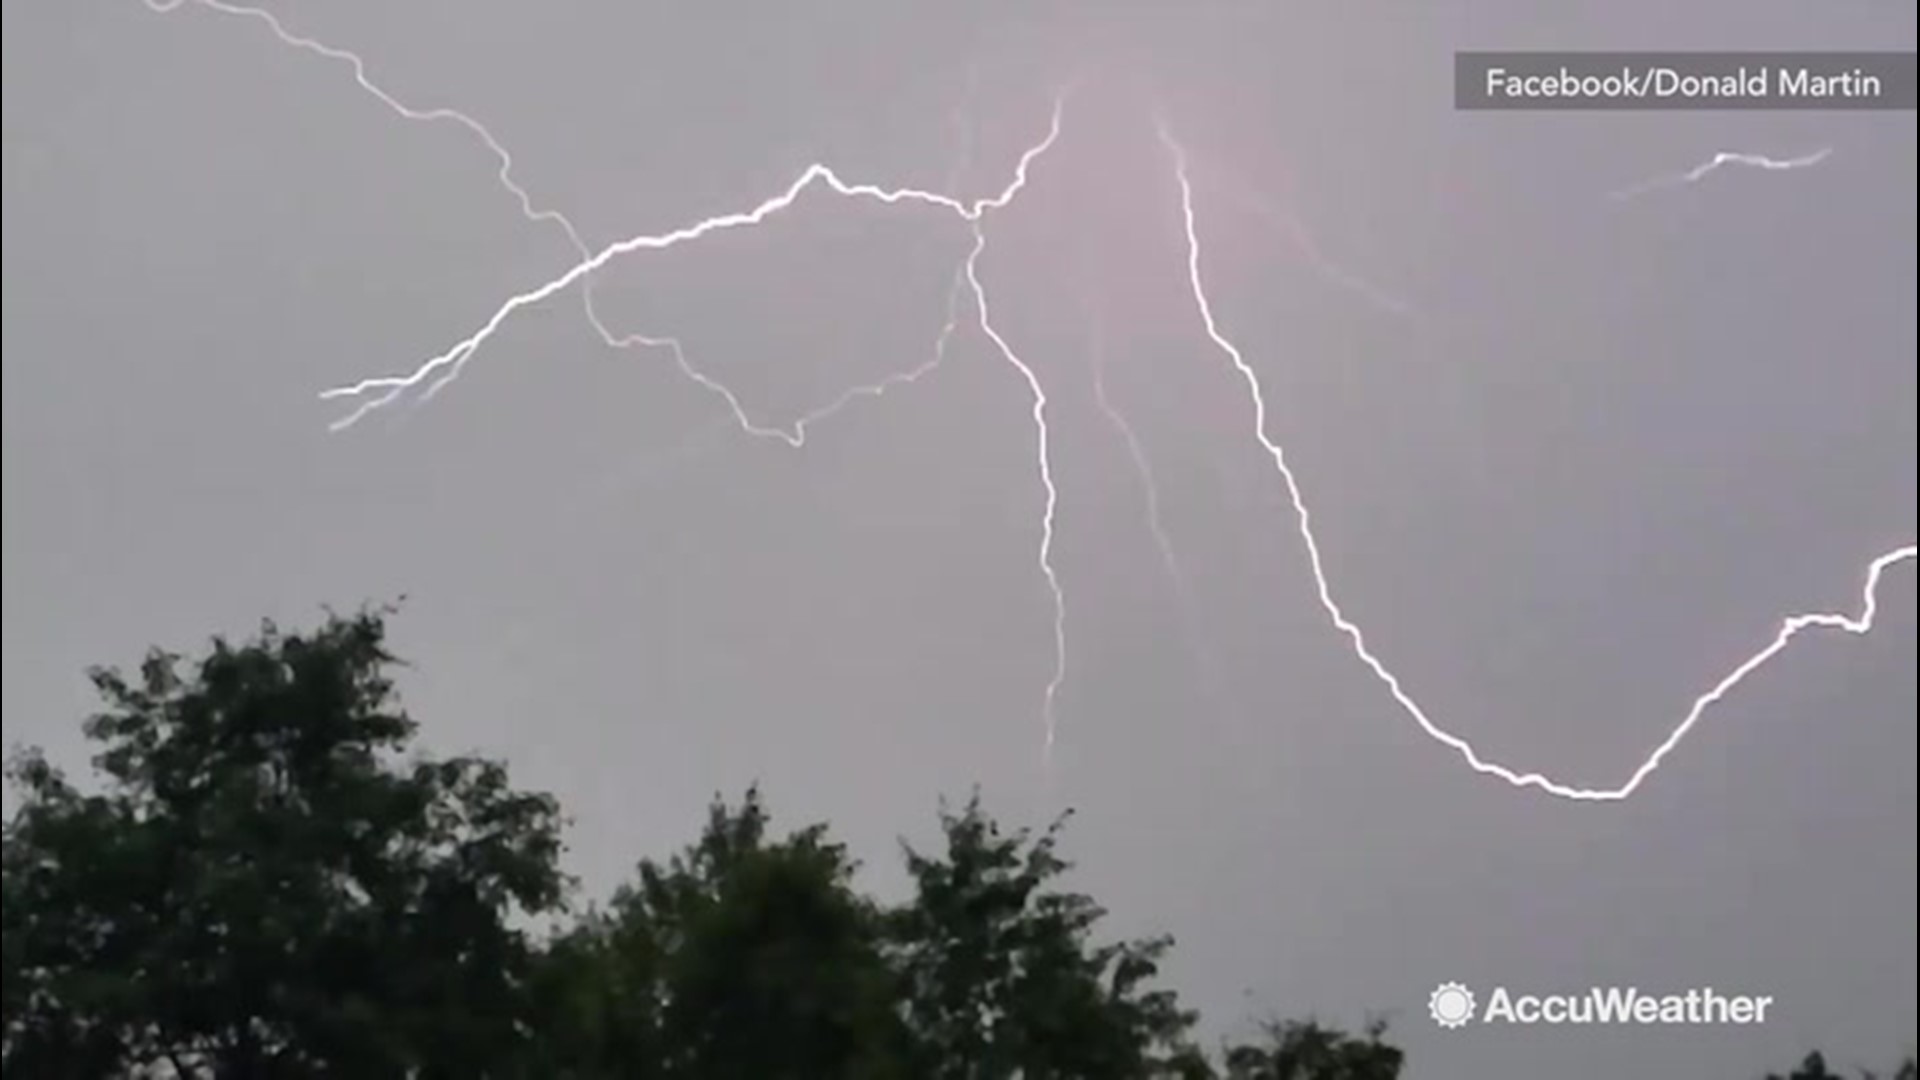 What you see takes place in a fraction of a second. Donald Martin filmed a lightning strike in slow motion on his Galaxy S9 phone, and we slowed it down even more. The lightning strike was filmed on Monday 6/24 from in Sharpsville, PA just north of Pittsburgh.